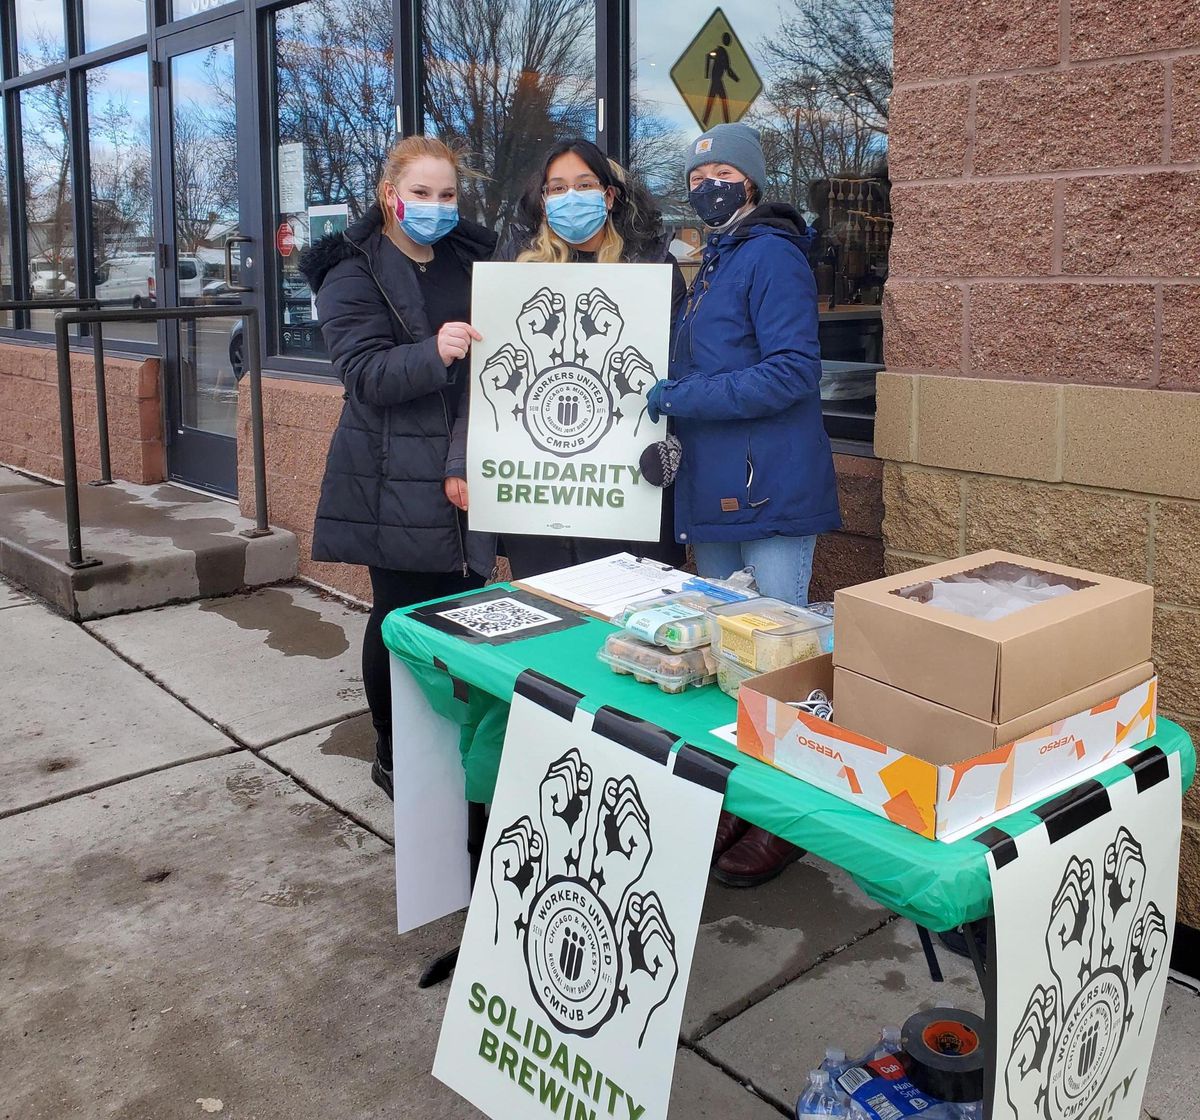 Three young people wearing coats and facemasks stand outside a Starbucks building holding a “solidarity brewing” poster with four raised fists on it.